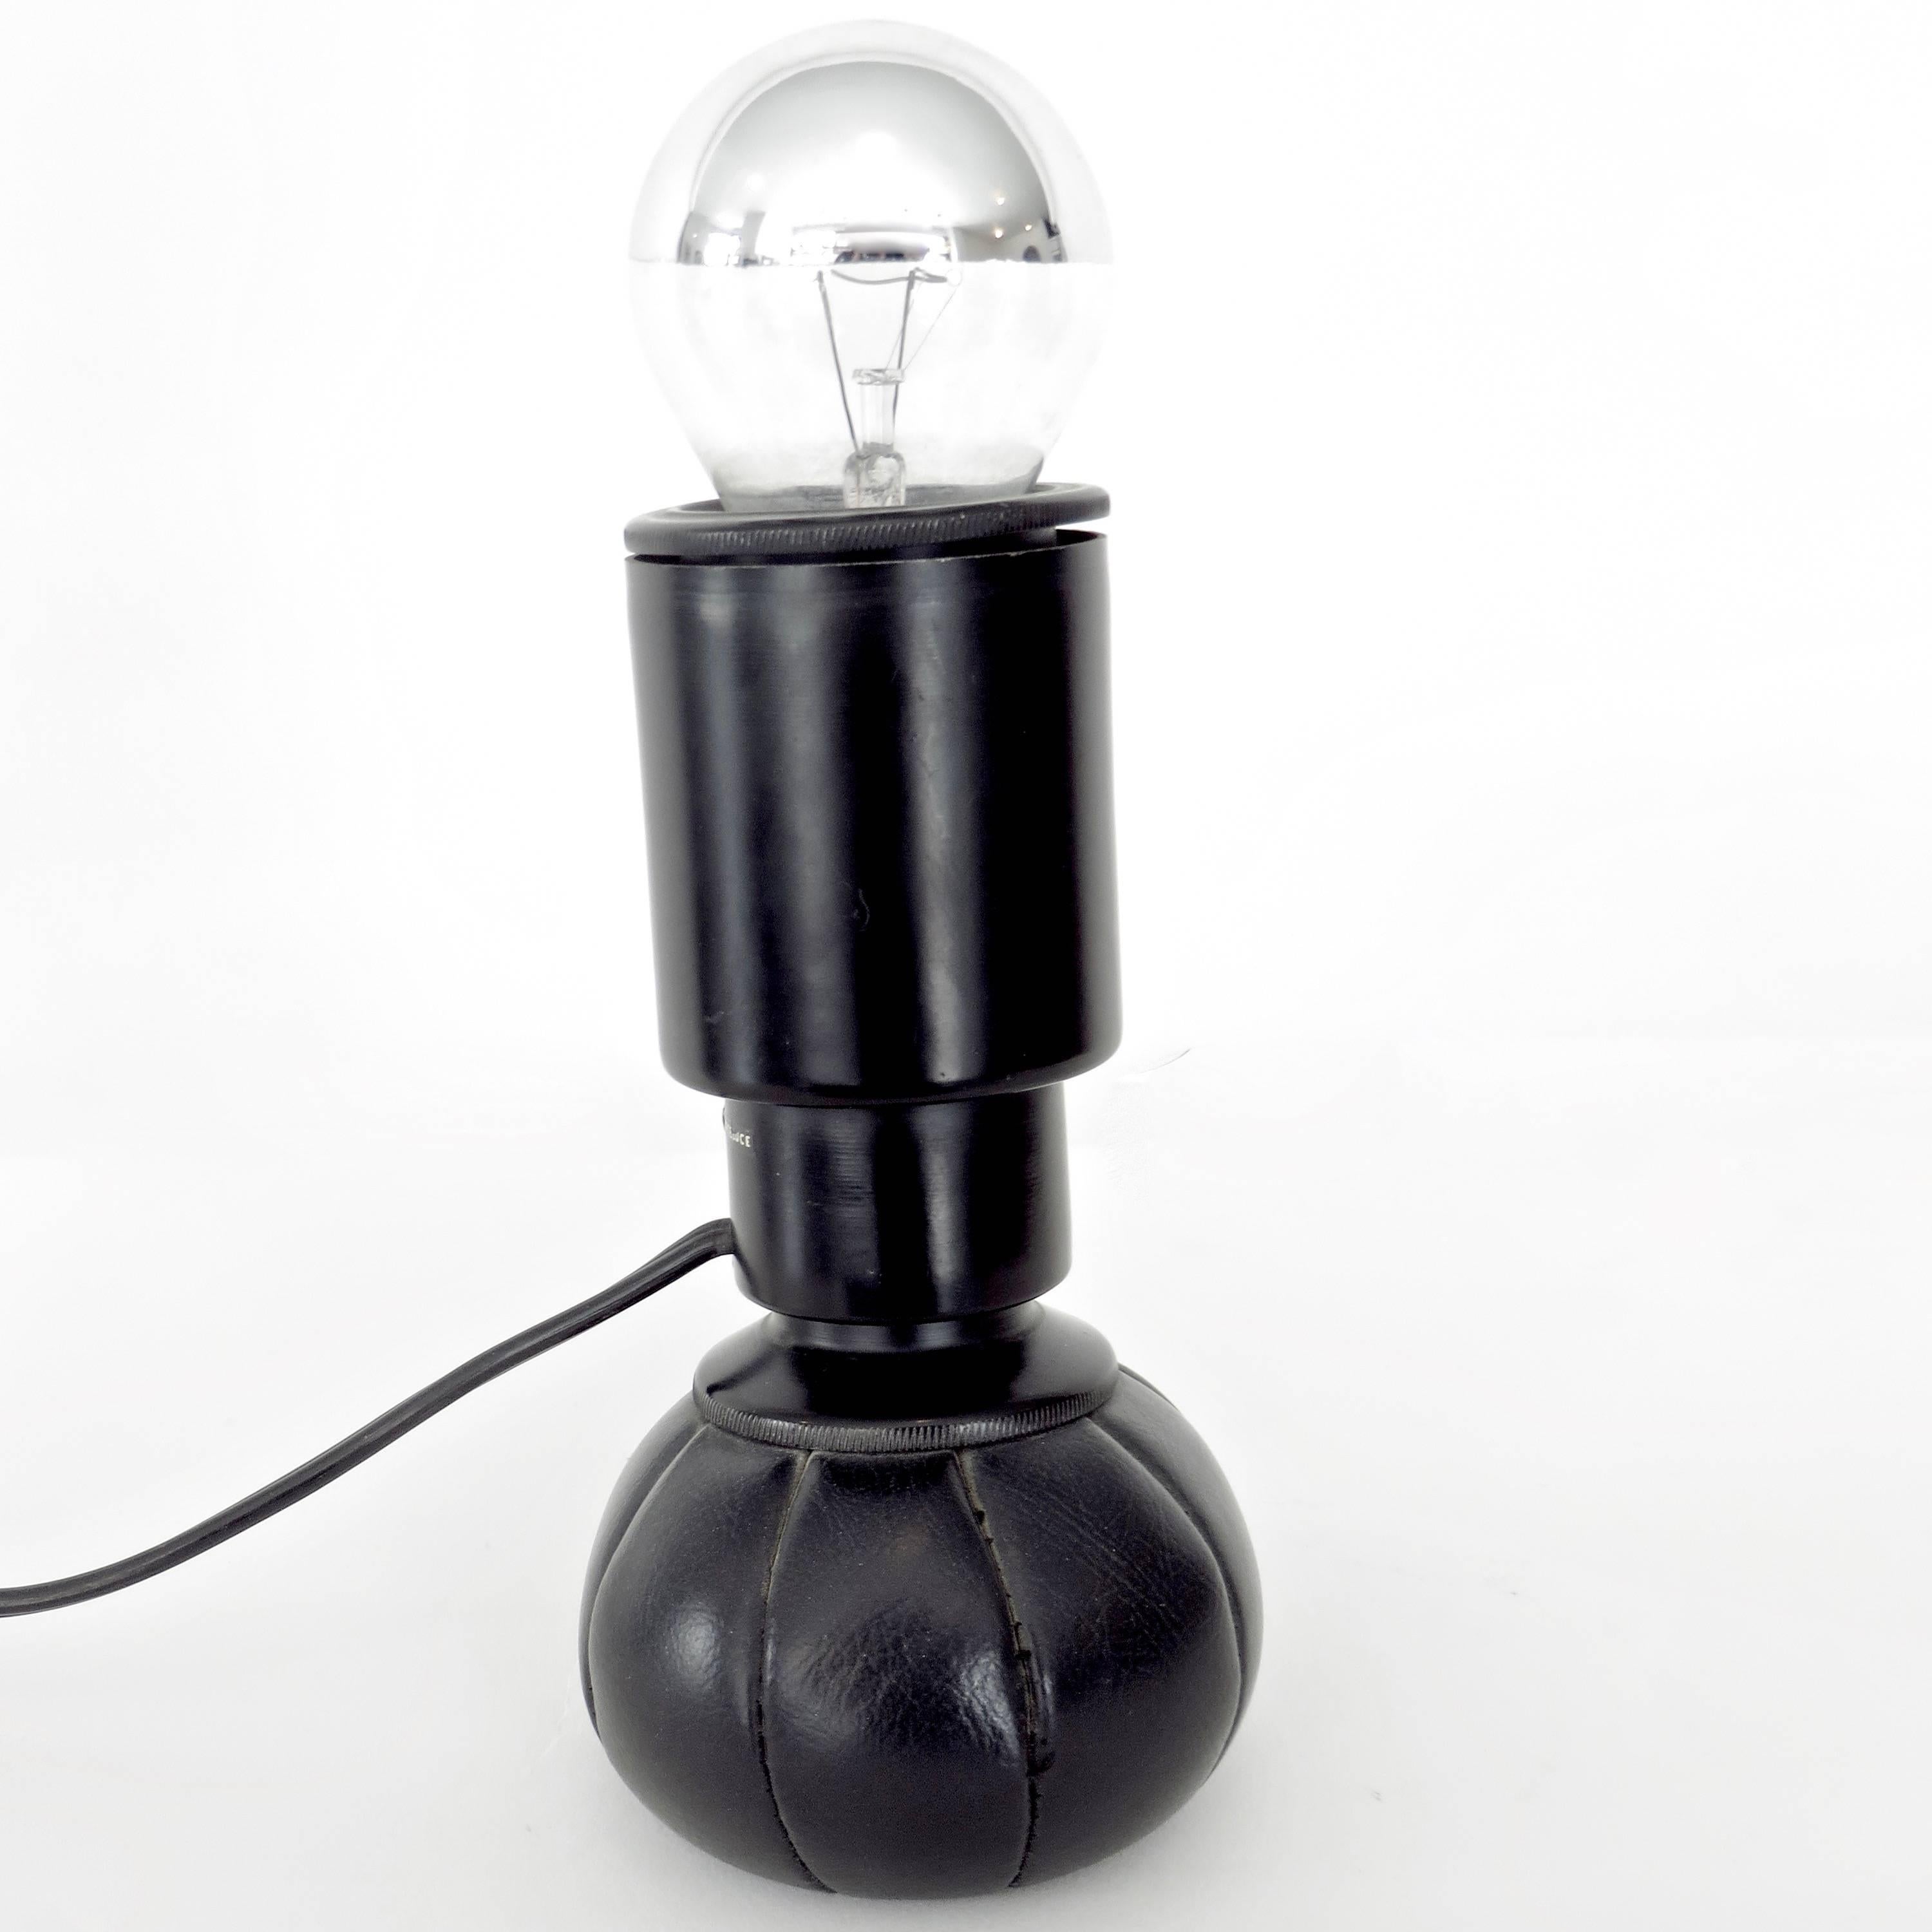 Rare first edition of the 600G lamp by Gino Sarfatti for Arteluce, 1966. 
This is from the first production with the original early Arteluce label. This lamp was made of black lacquered aluminum and has a leather weighted base. The lamp is in